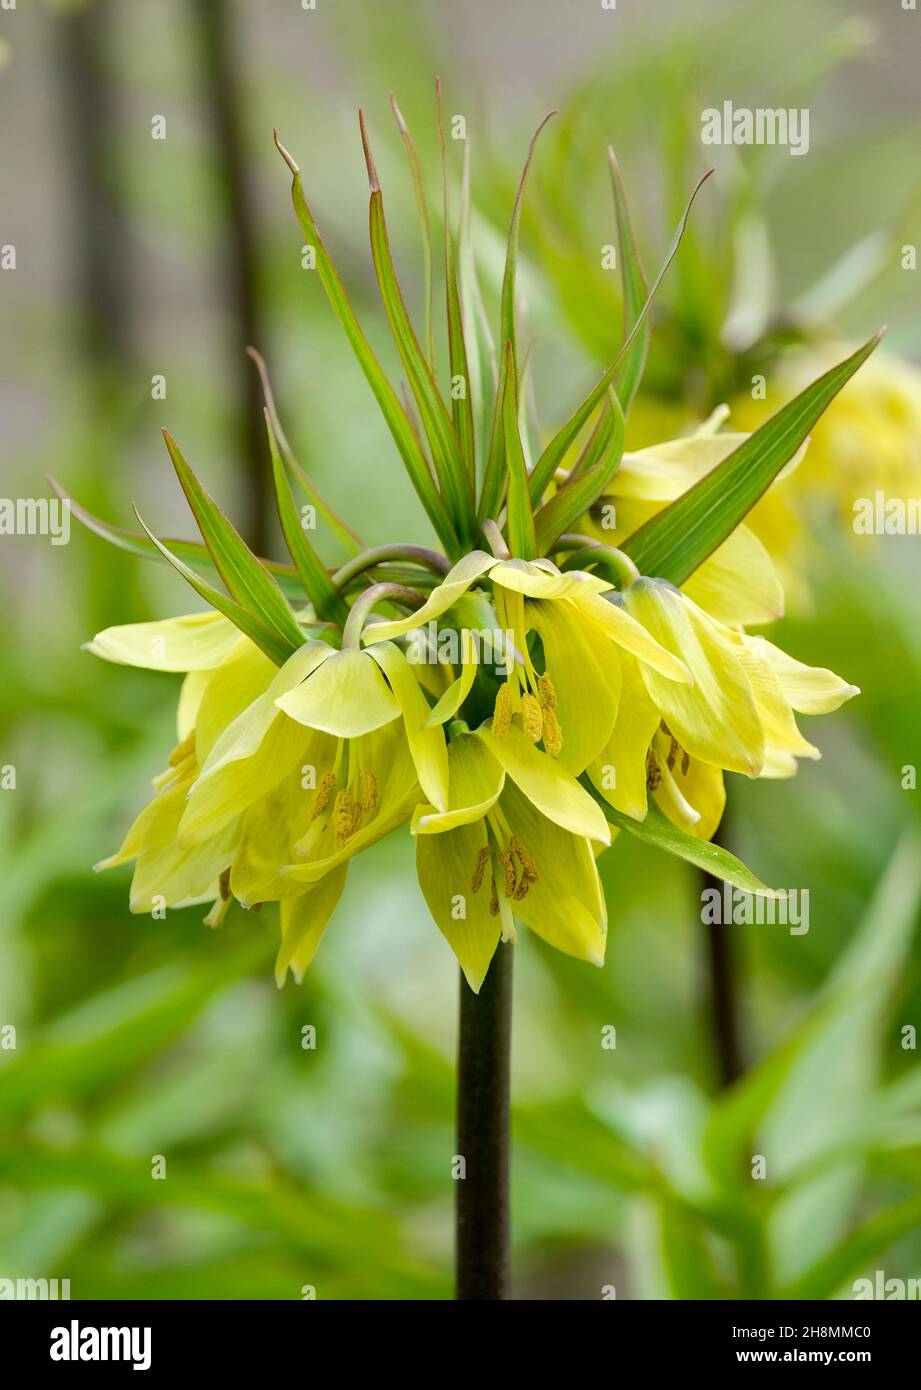 Fritilaria imperialis 'Early sensation', Crown Imperial 'Early sensation'.Gros plan de fleurs jaunes Banque D'Images